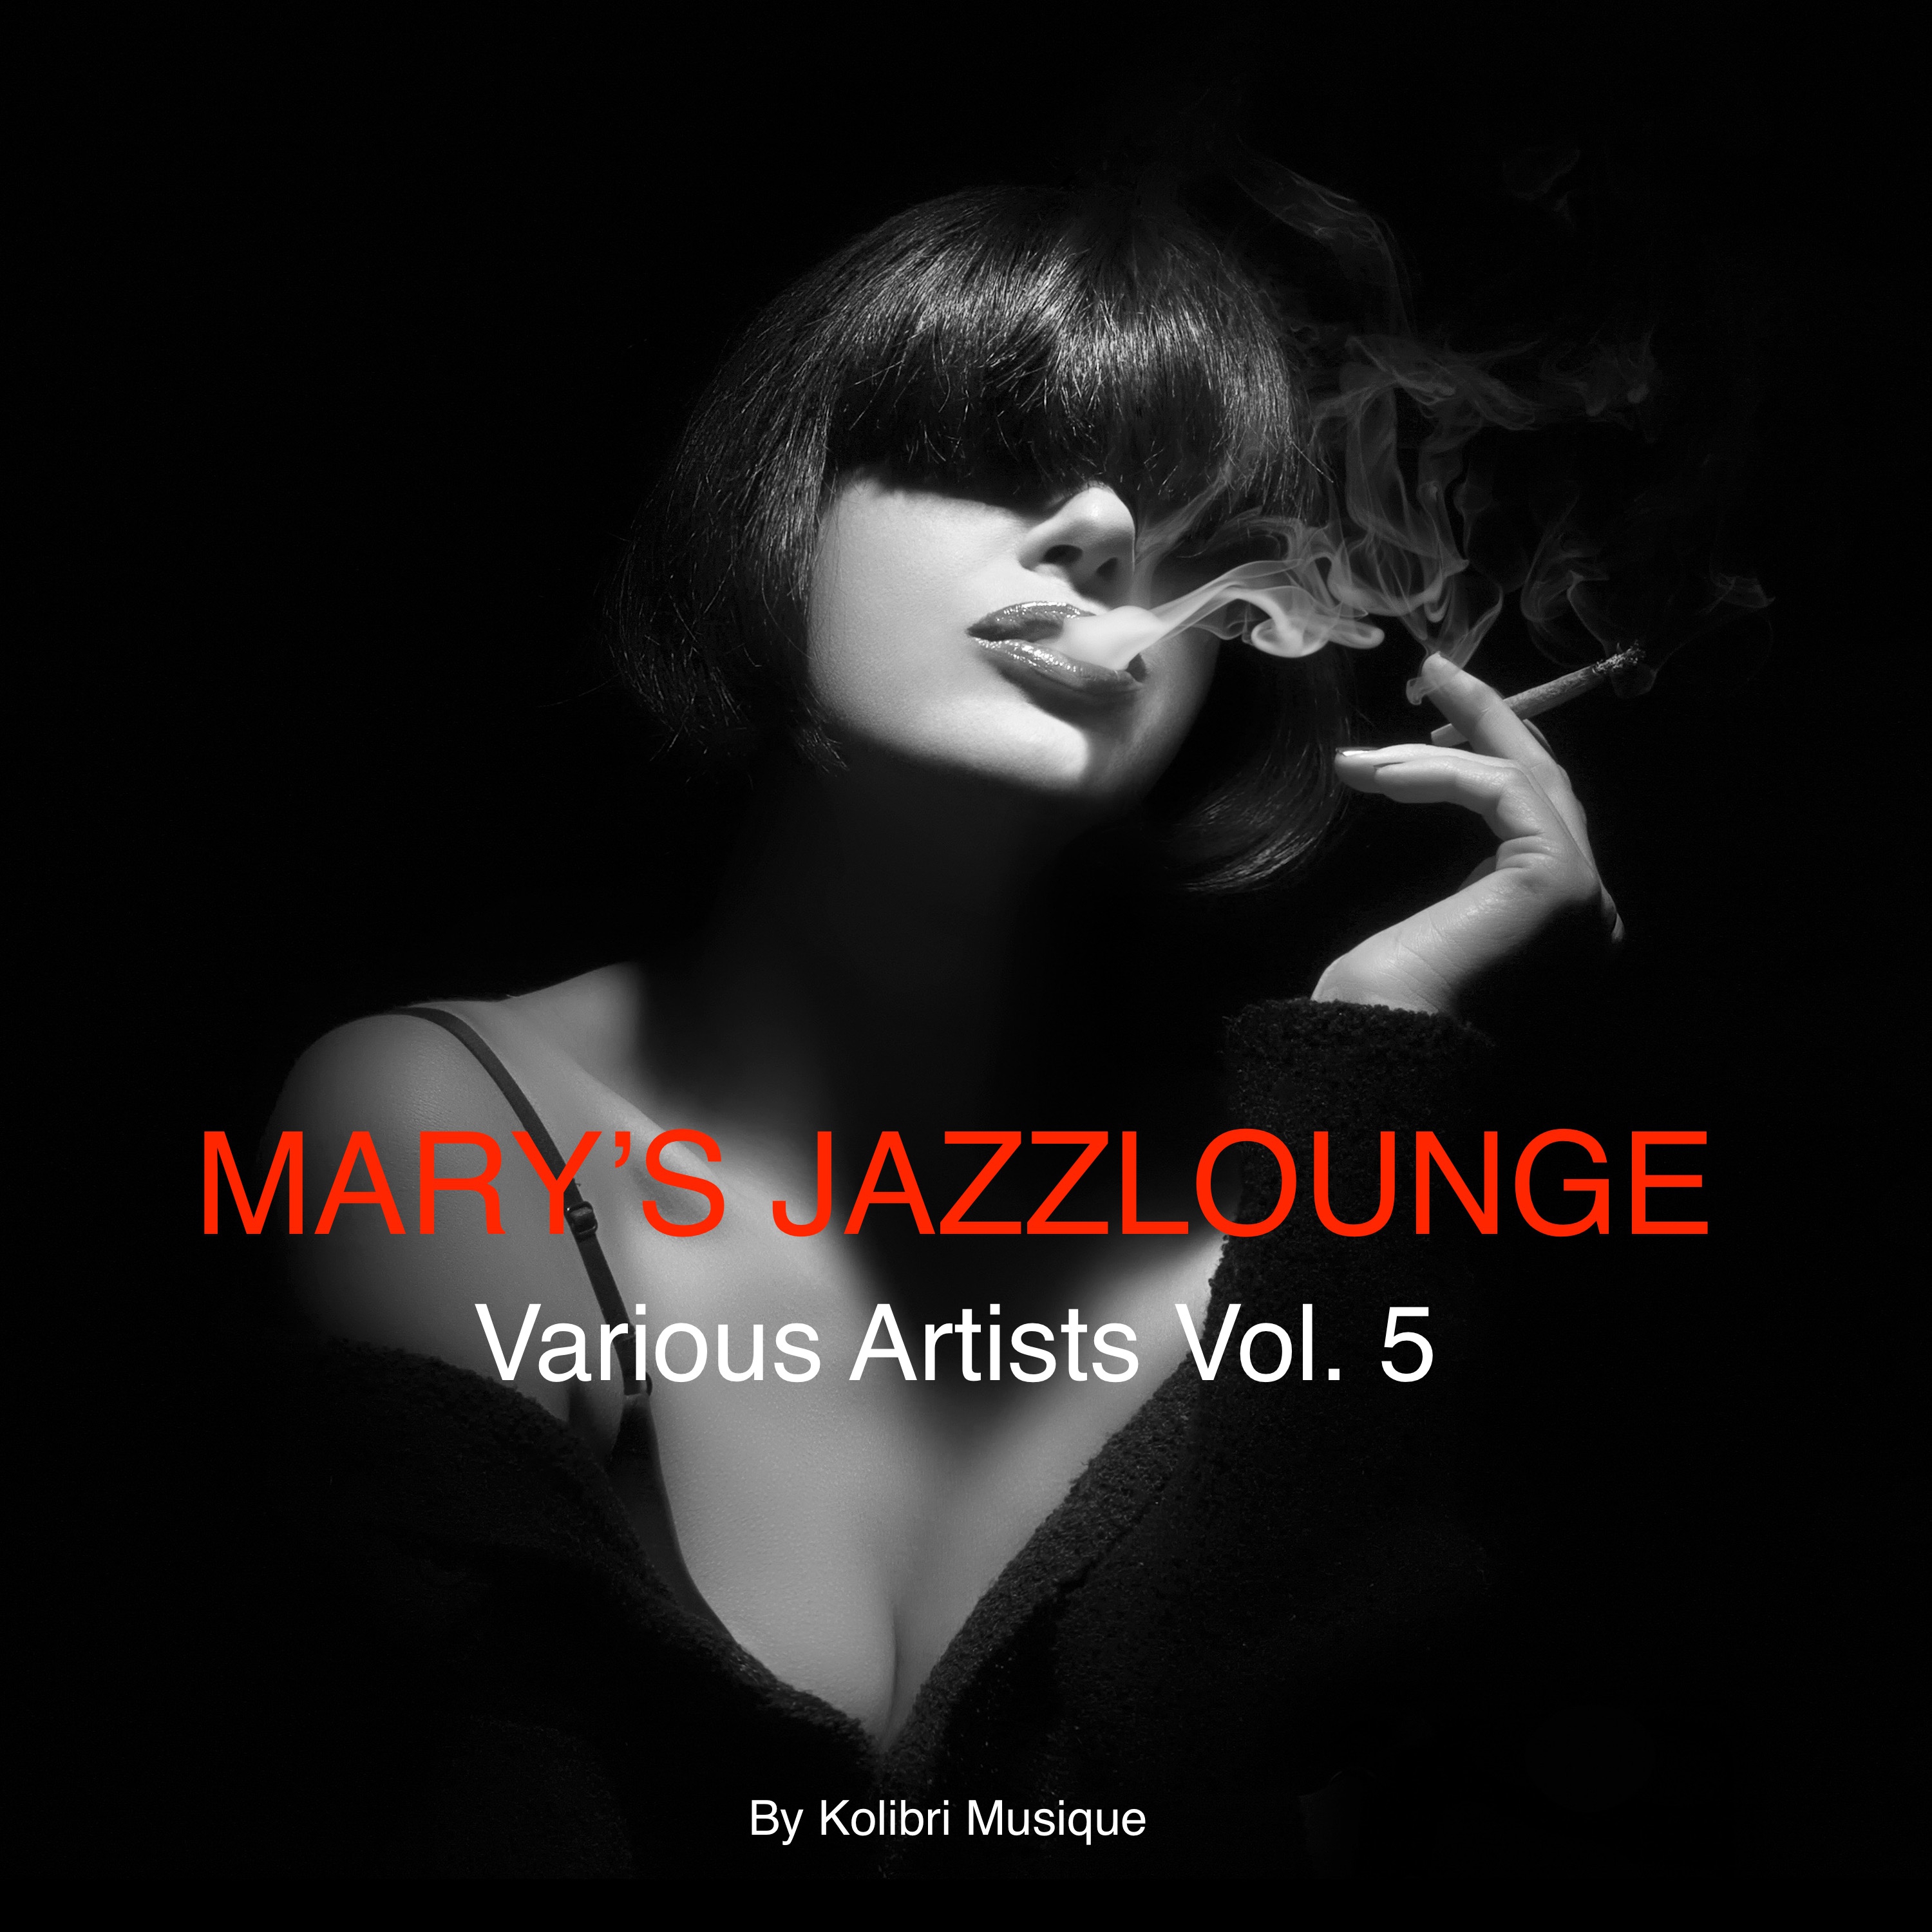 Mary's Jazzlounge Various Artists, Vol. 5 - Presented by Kolibri Musique